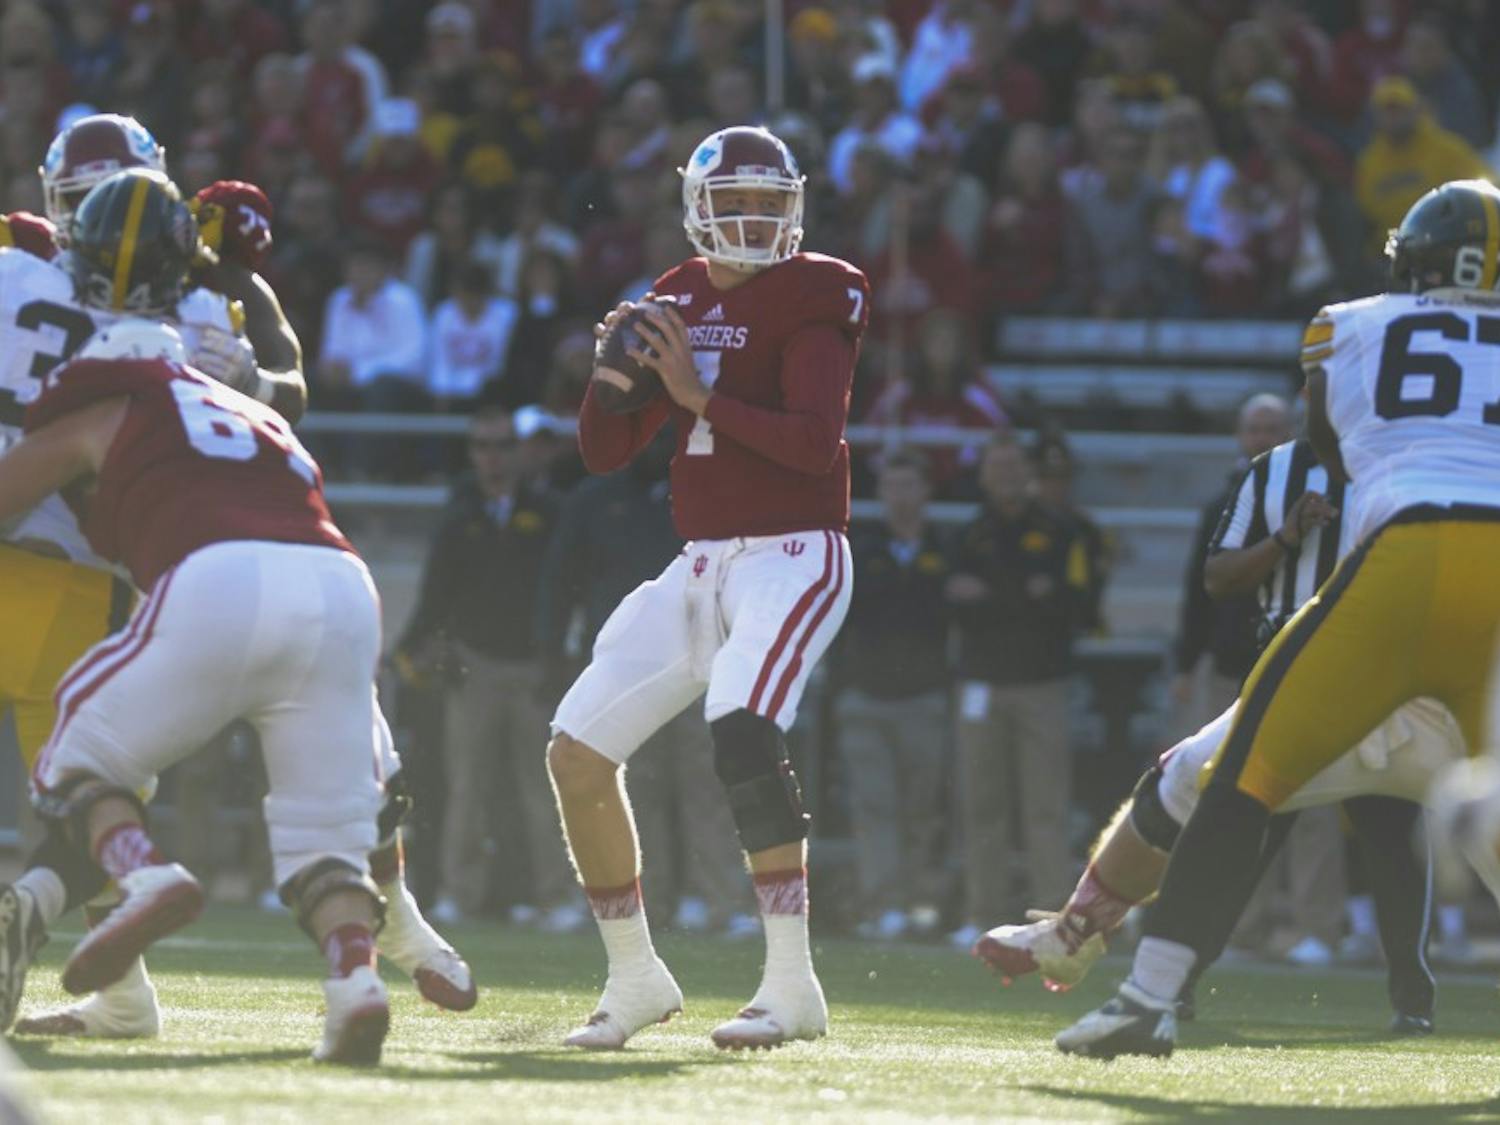 Quarterback Nate Sudfeld looks to pass during the game against Iowa on Saturday at Memorial Stadium. The Hoosiers lost, 27-35.